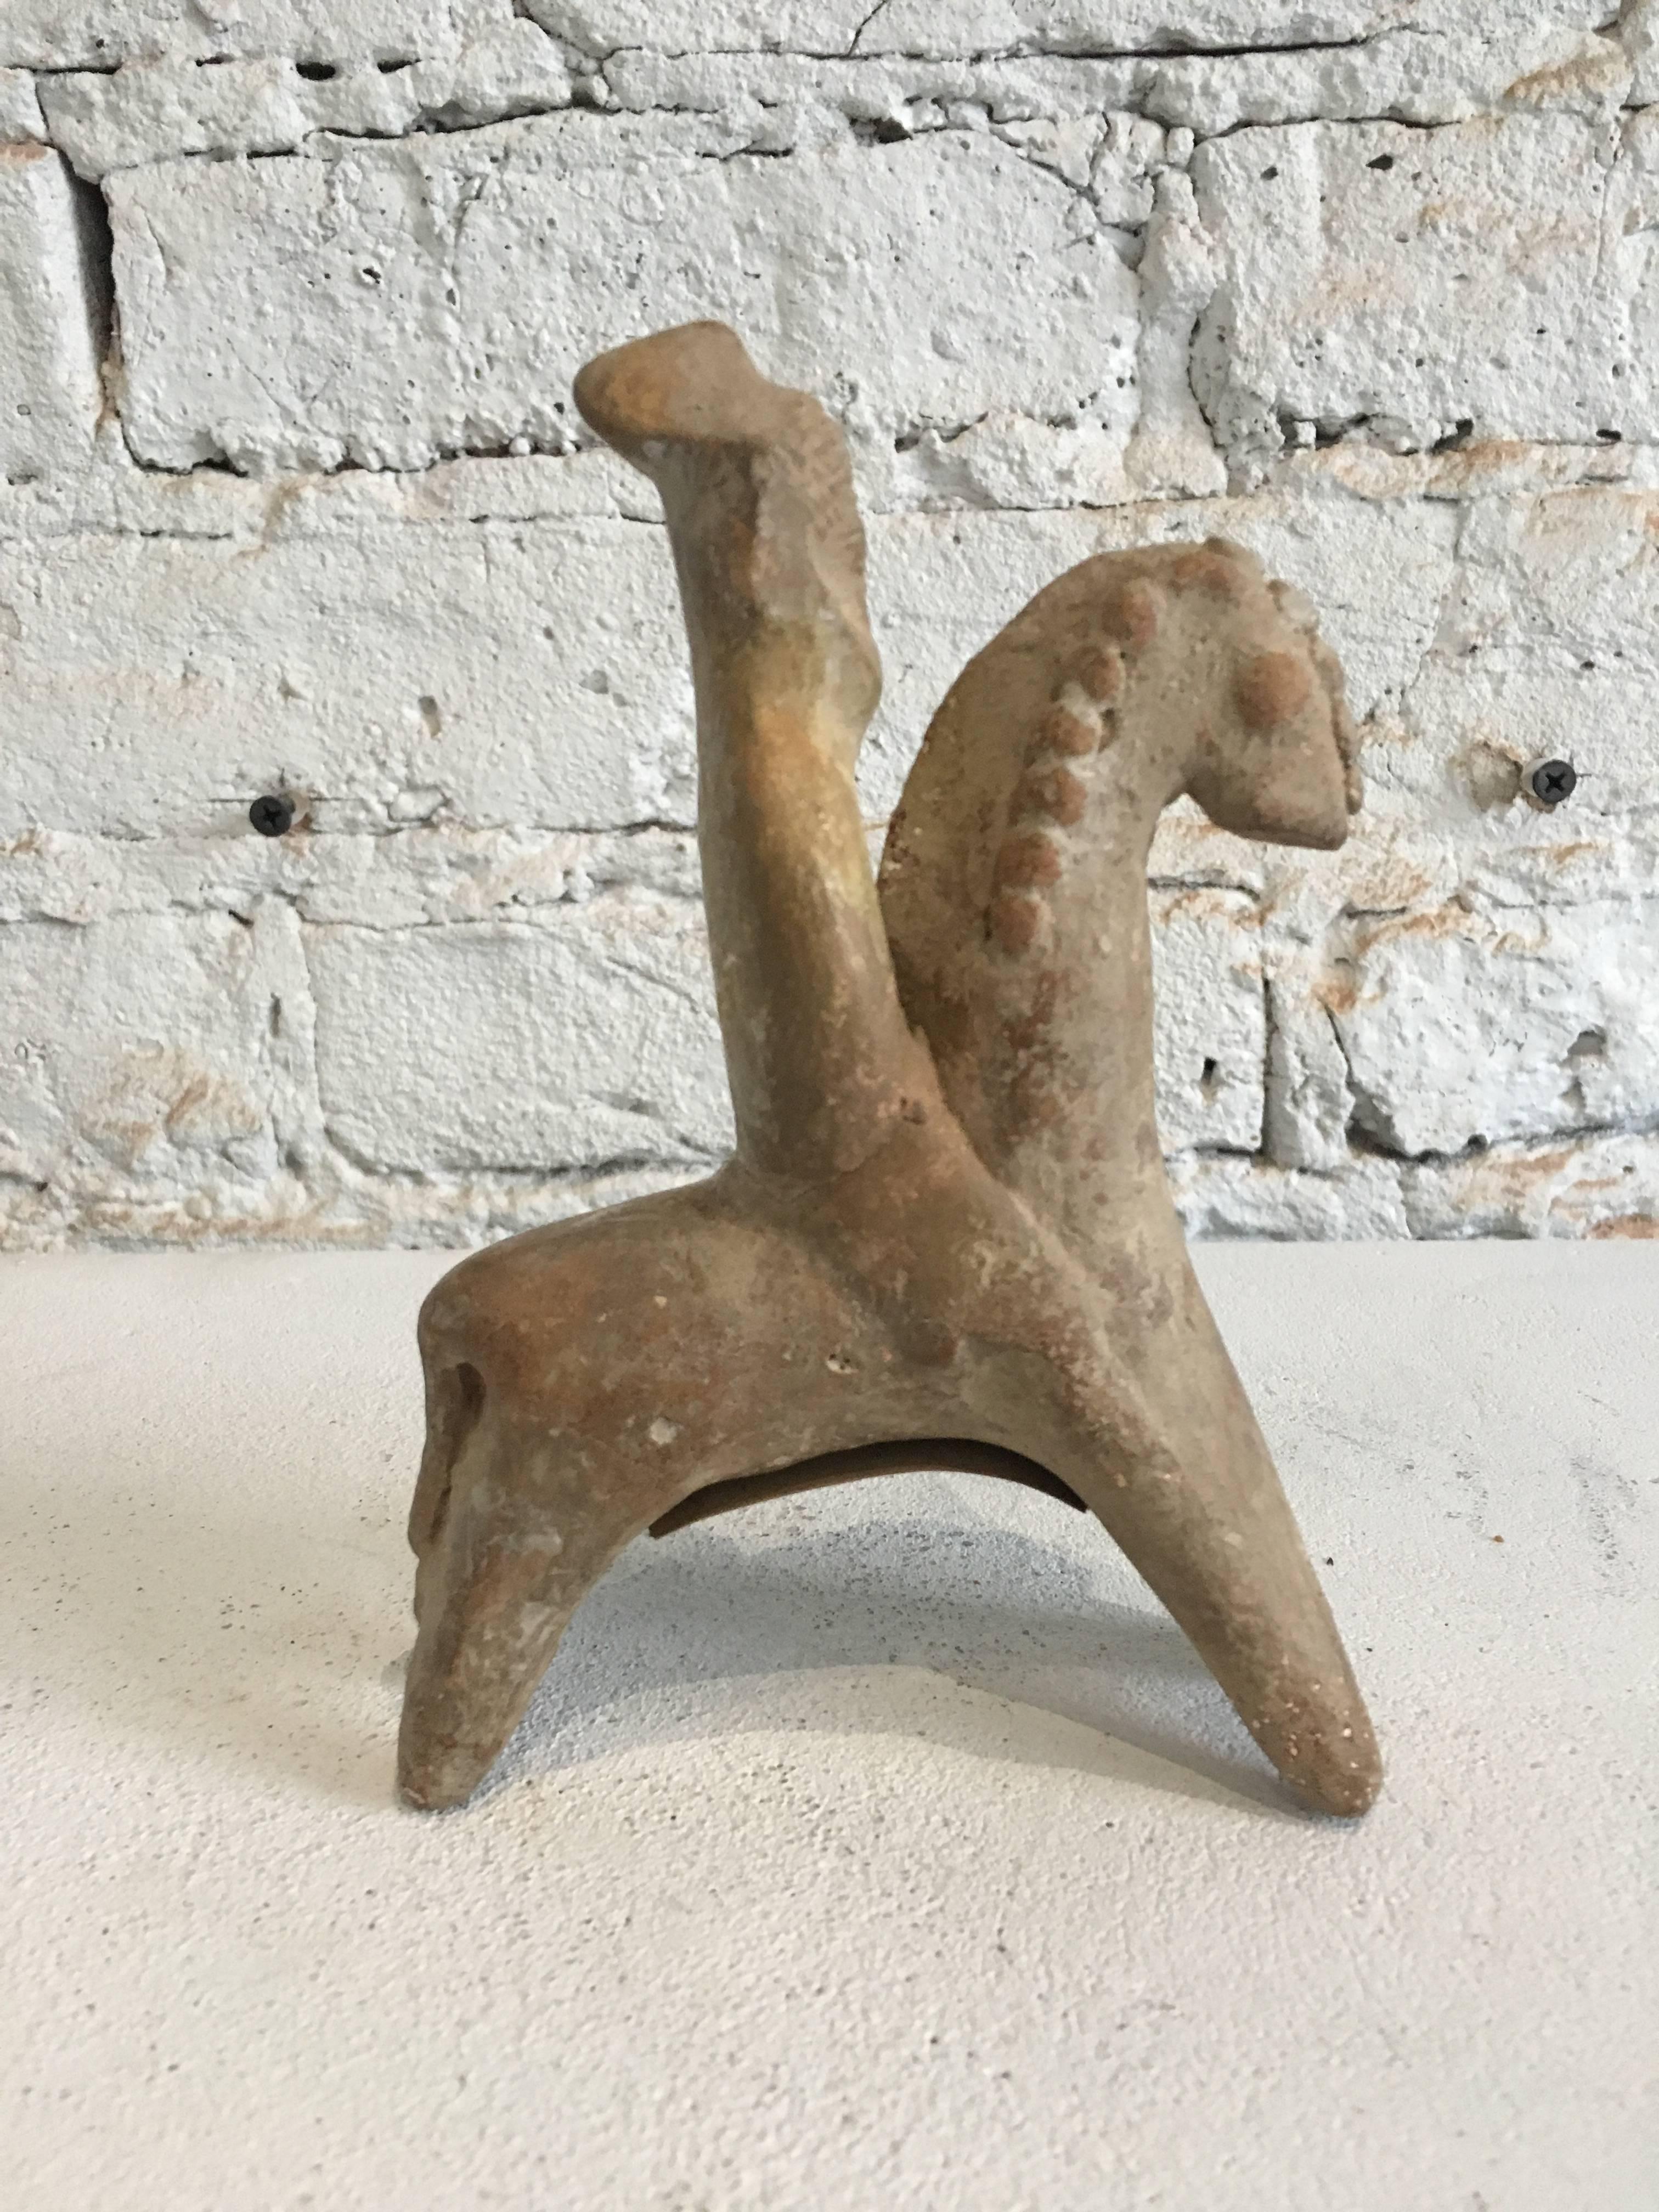 19th Century Reproduction of a 16th Century Stone Artifact / Warrior on Horse 
Artifact appears to be cast 